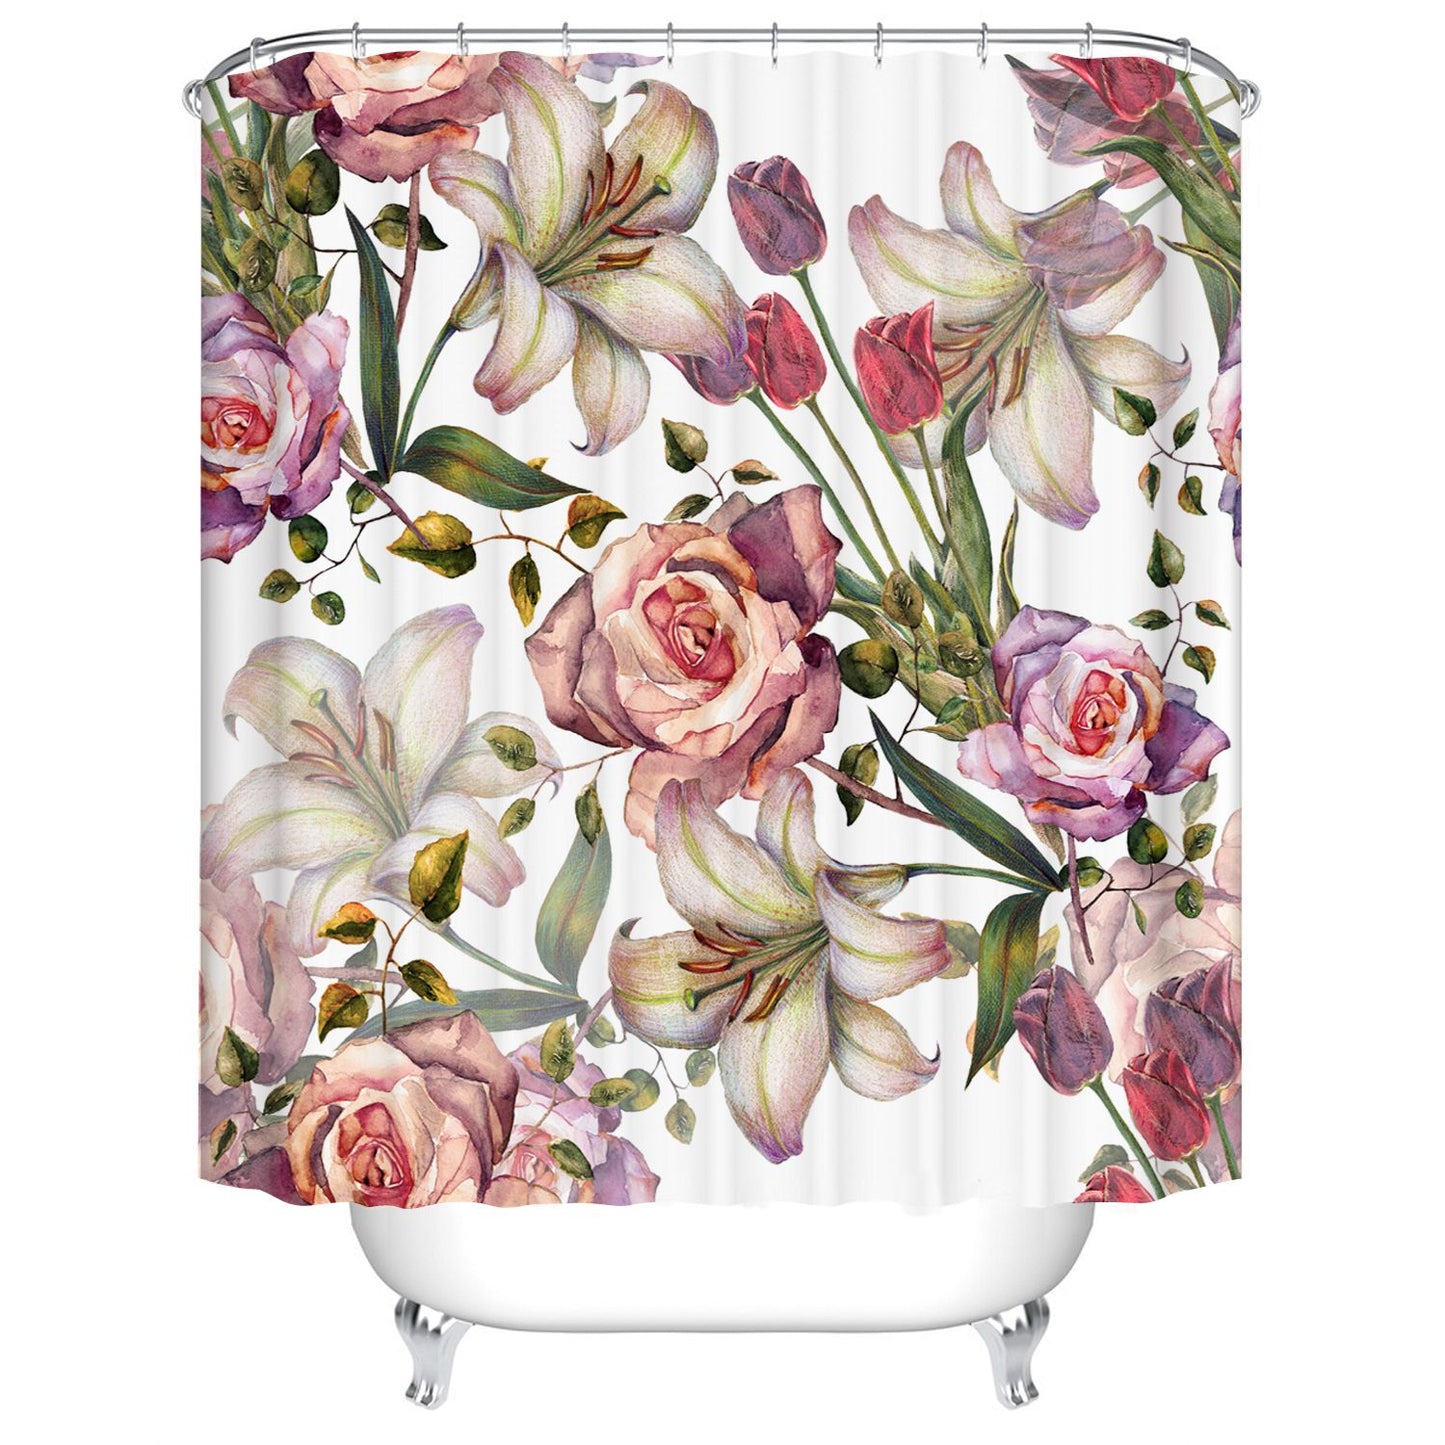 Watercolor Lily and Roses Shower Curtain